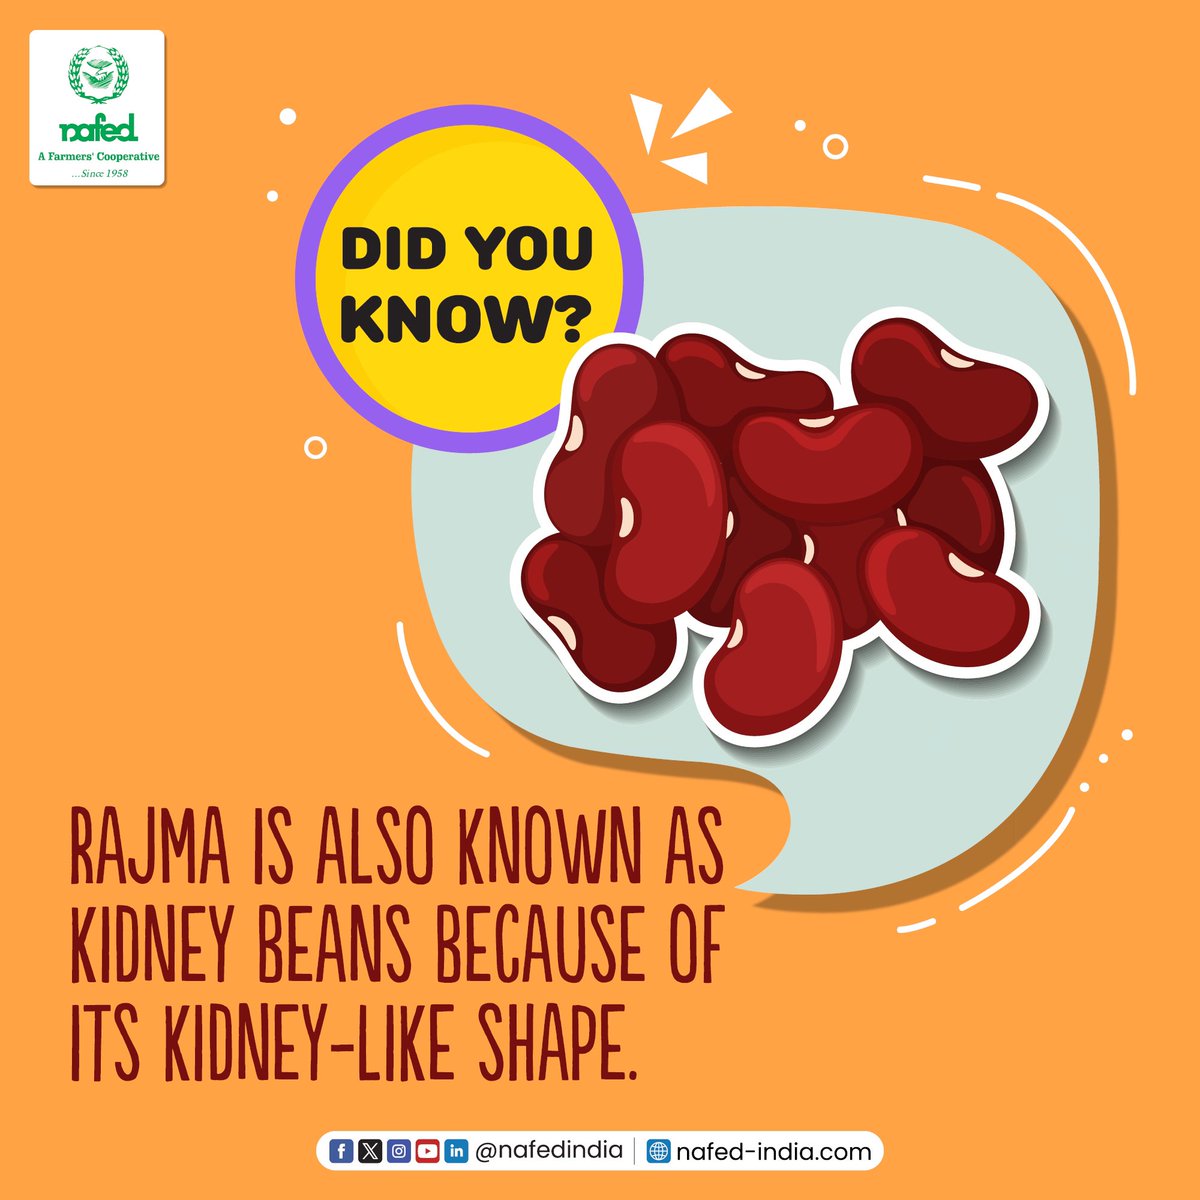 Rajma, a staple in many cuisines, is nicknamed 'kidney beans' because of its resemblance to kidneys. These legumes are commonly used in curries, adding both flavor and nutrition to dishes.

#NAFED #NAFEDIndia #didyouknow #kidneybeans #rajma #facts